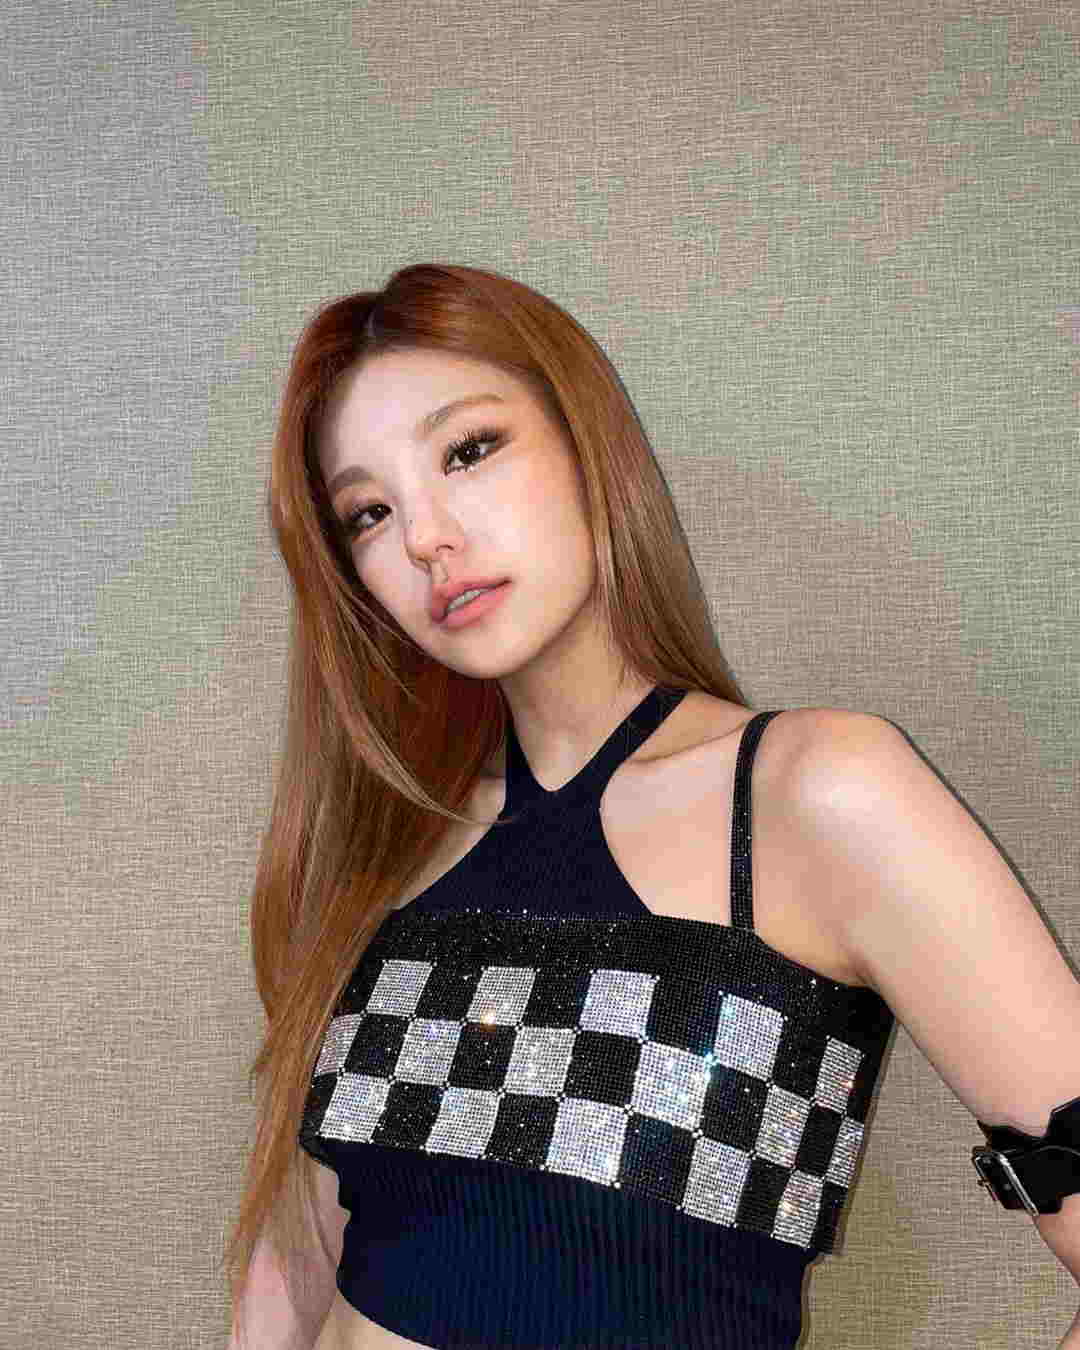 Member of ITZY - Biography, Profile, Facts, and Career